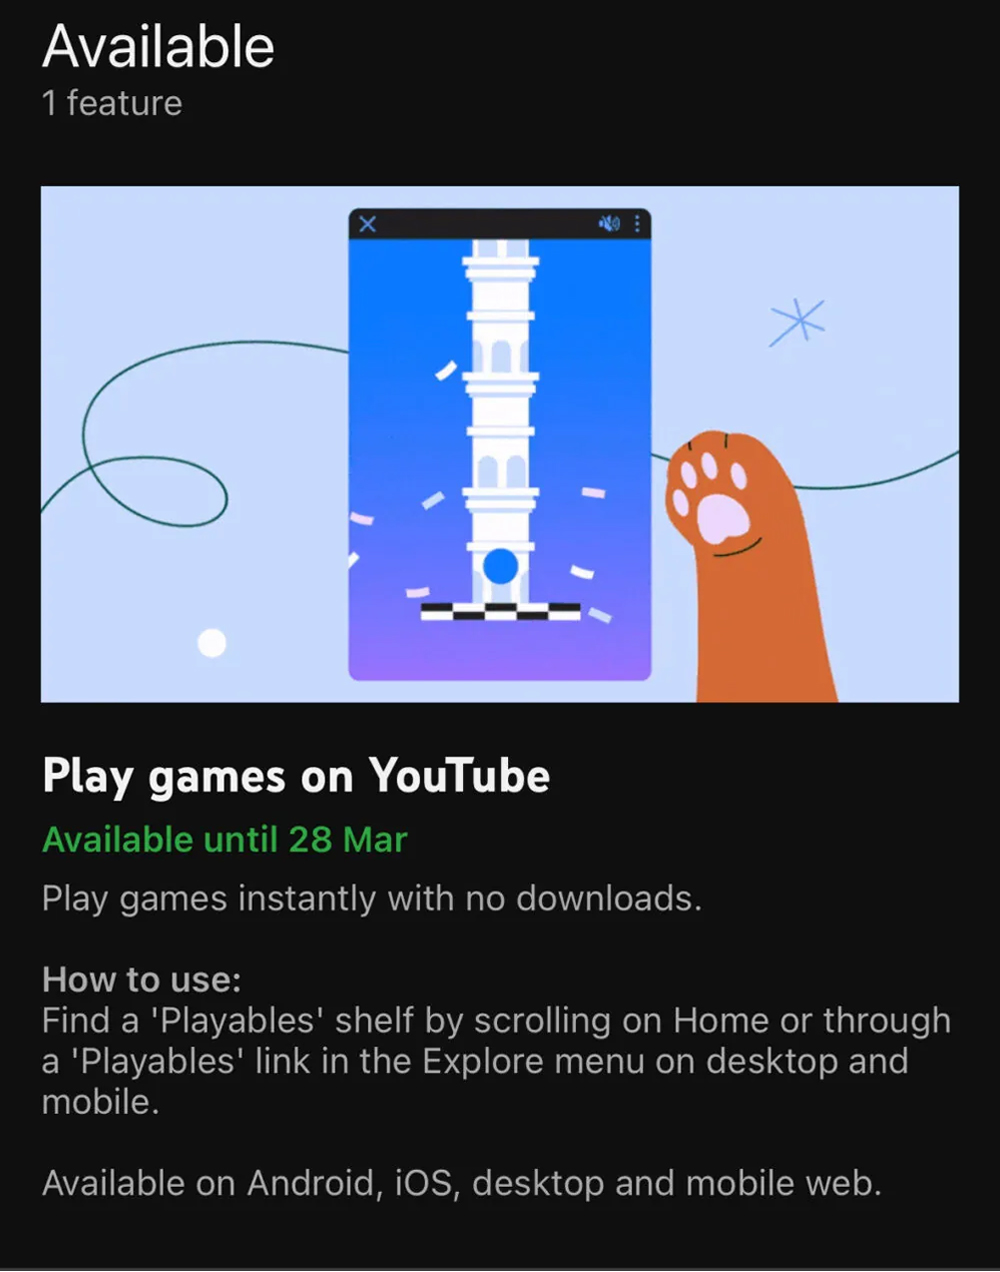 Soon, Playables will be removed from YouTube © Android Authority